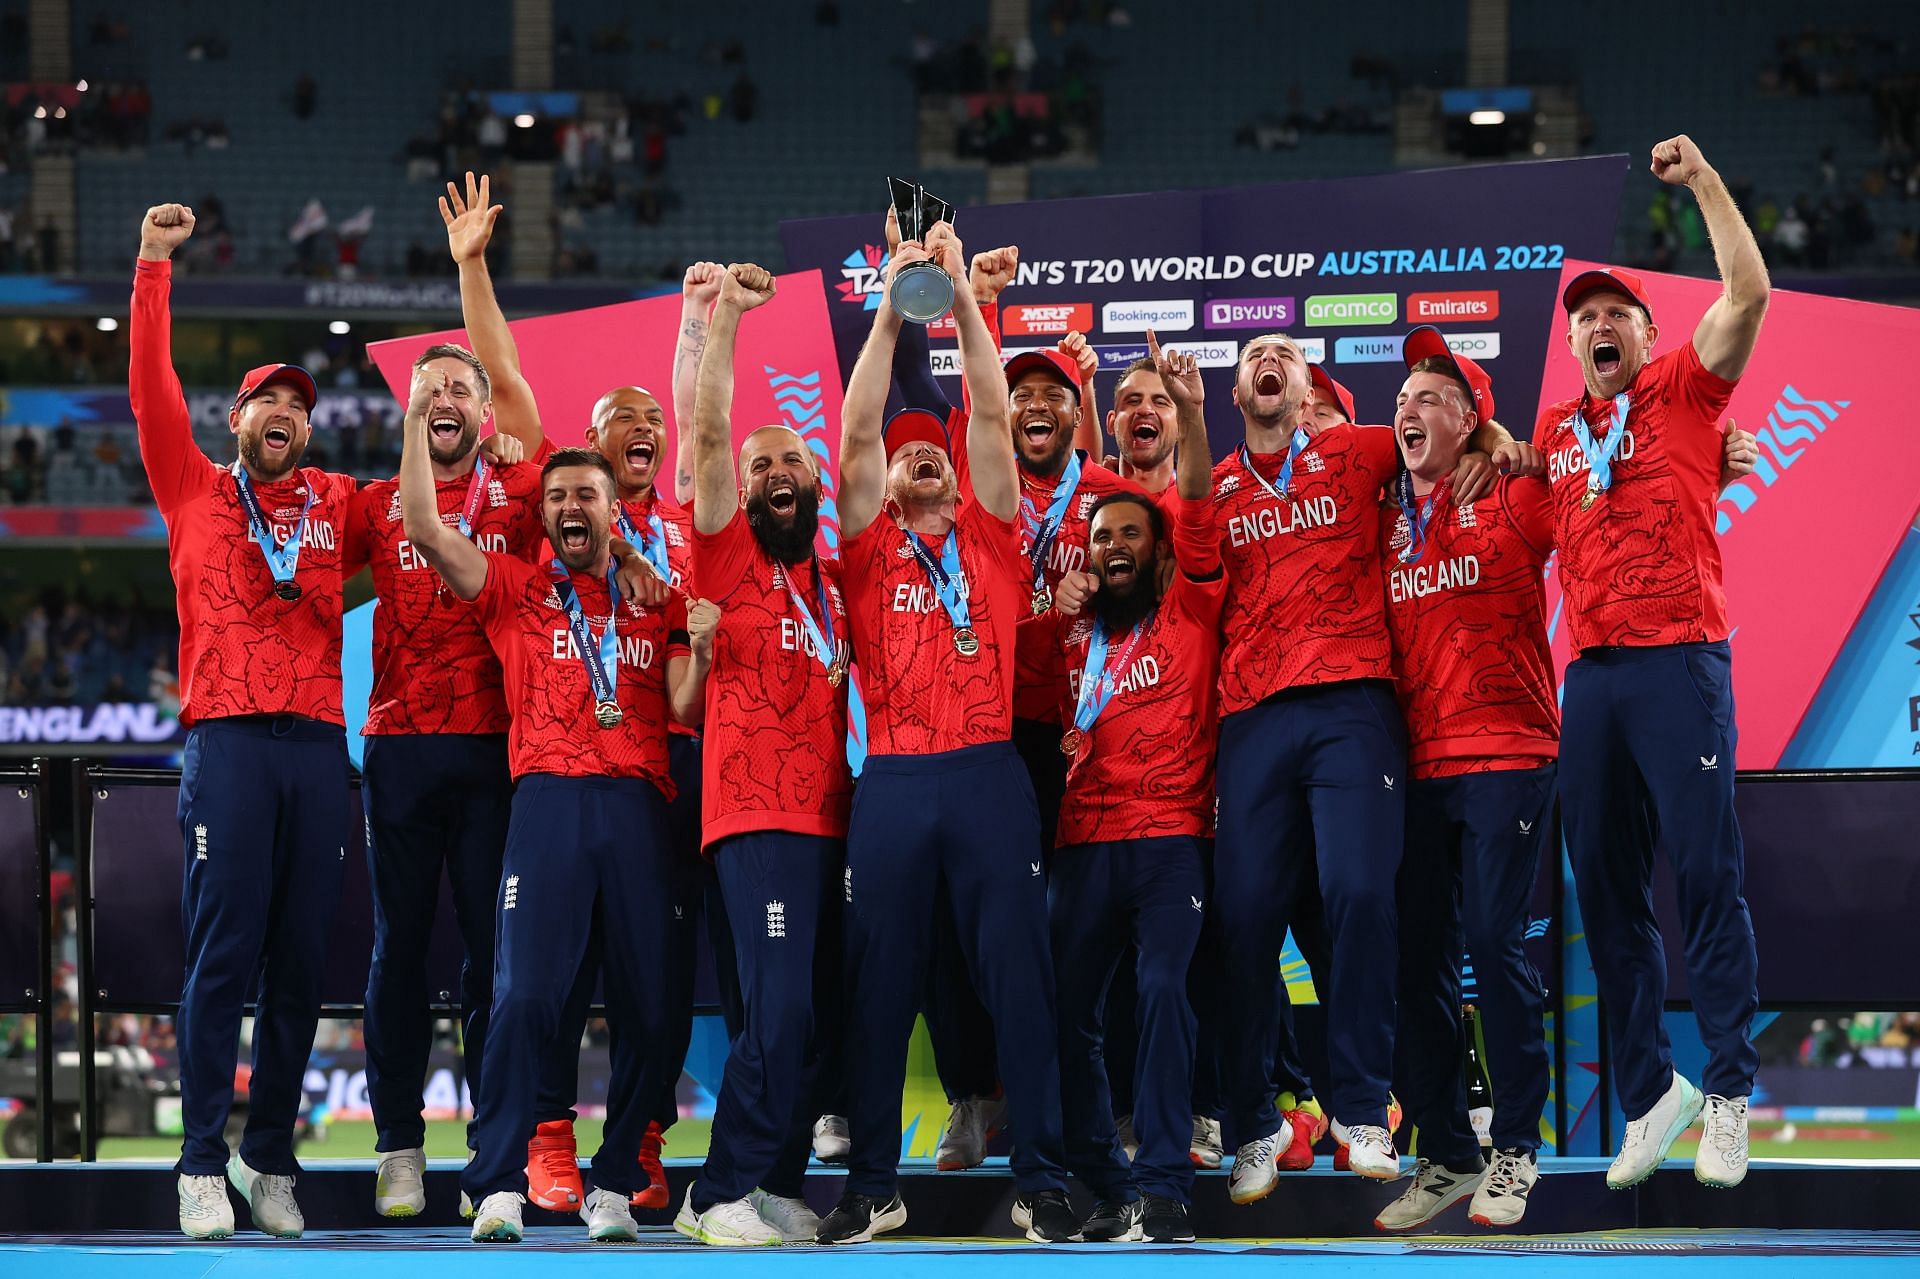 USA Cricket stripped as cohost of ICC Men's T20 World Cup 2024